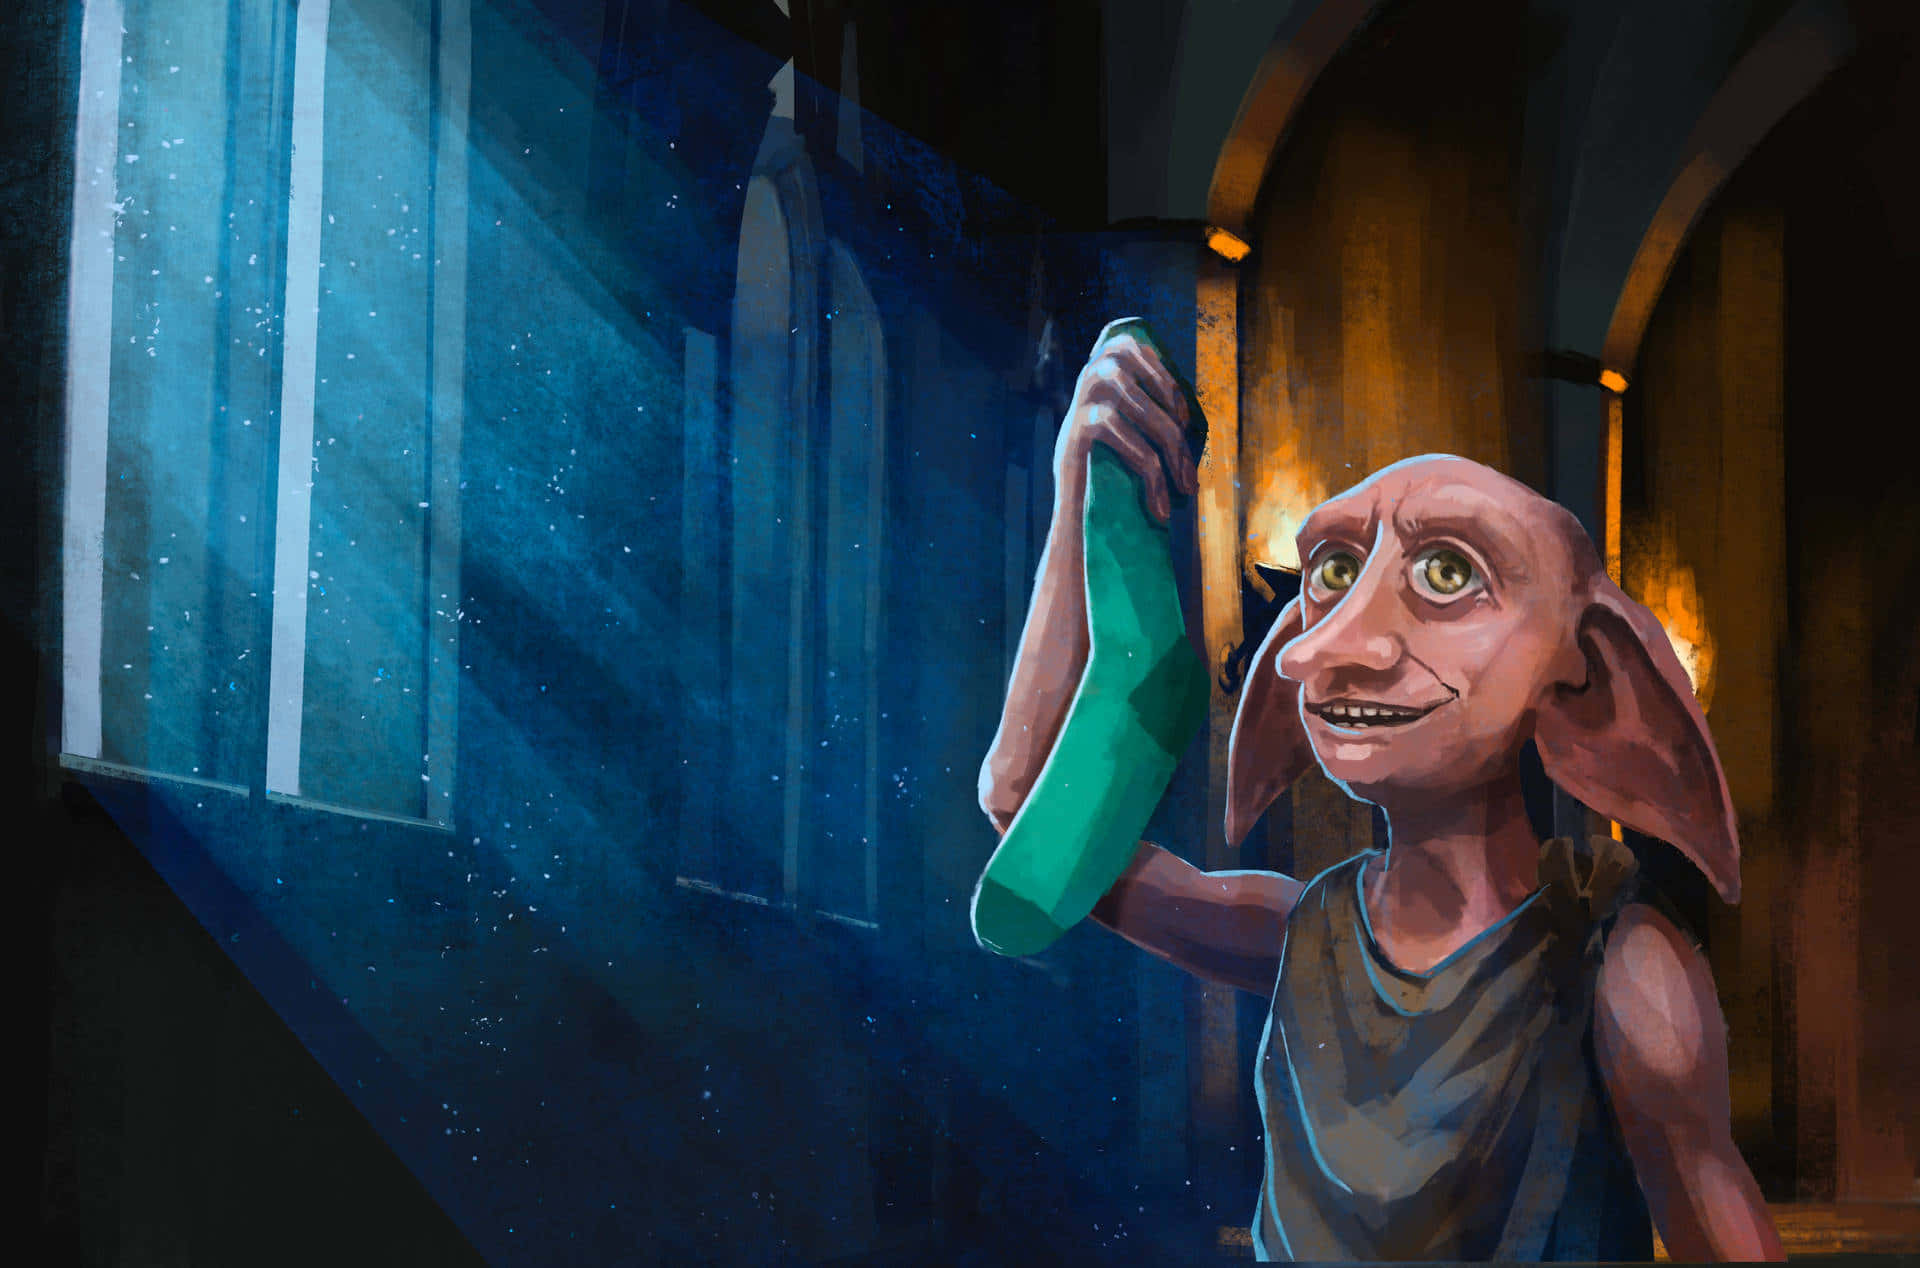 "We are free!" – Dobby, Harry Potter Wallpaper